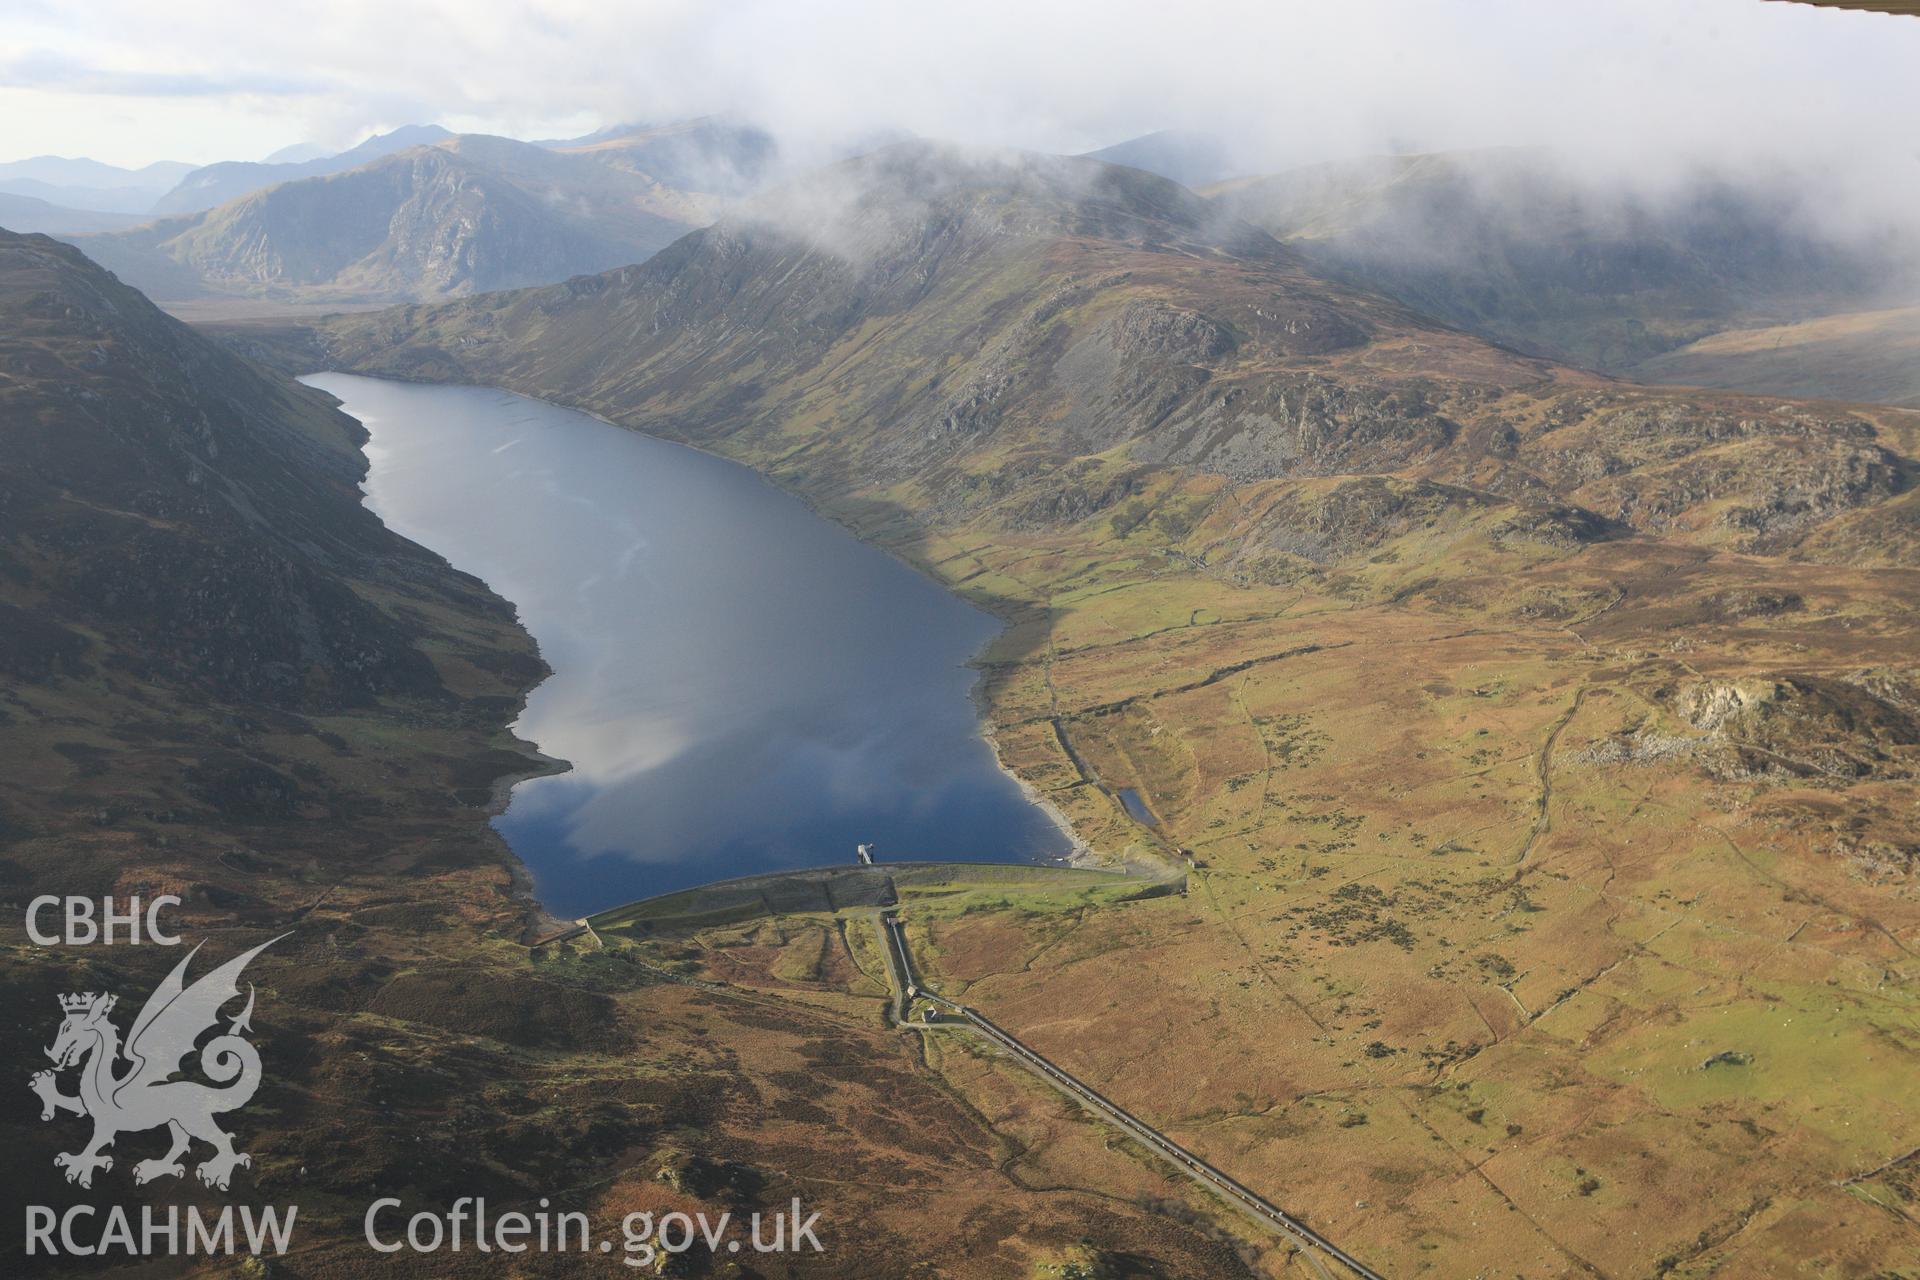 RCAHMW colour oblique photograph of Llyn Cowlyd, view from north-east. Taken by Toby Driver on 13/01/2012.